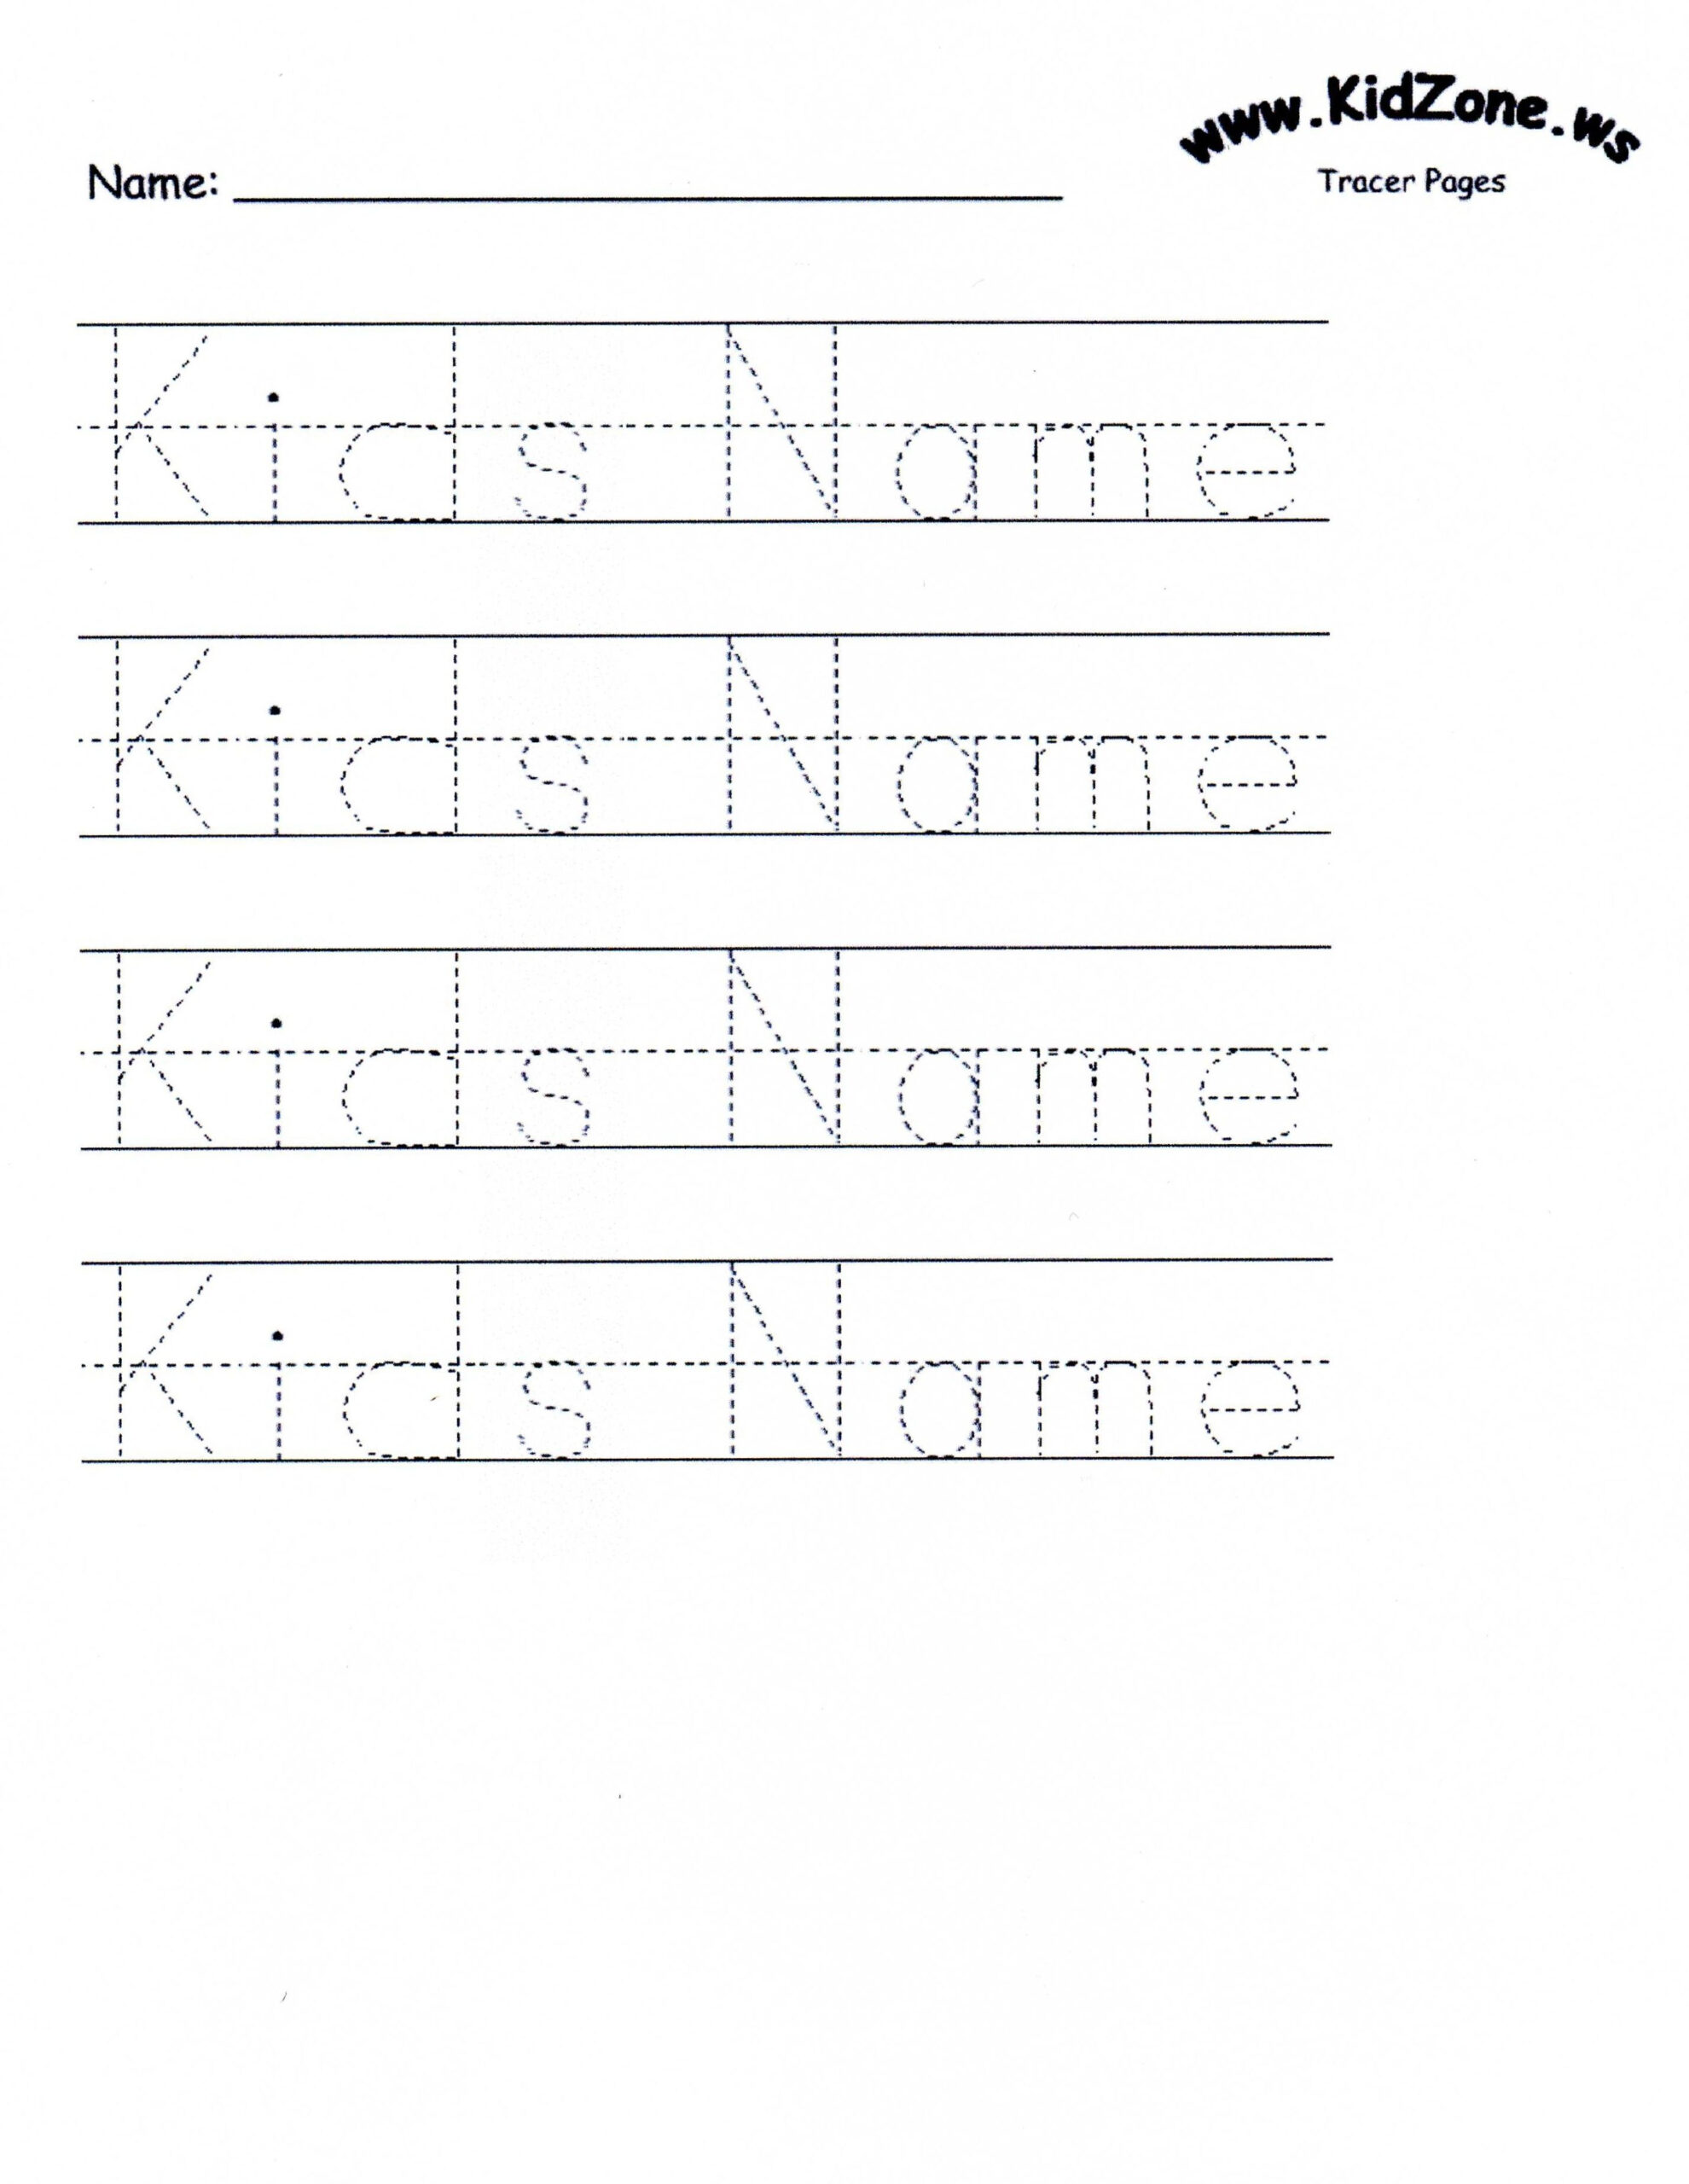 Custom Tracer Pages | Tracing Worksheets Preschool, Name for Name Letter Tracing Sheets